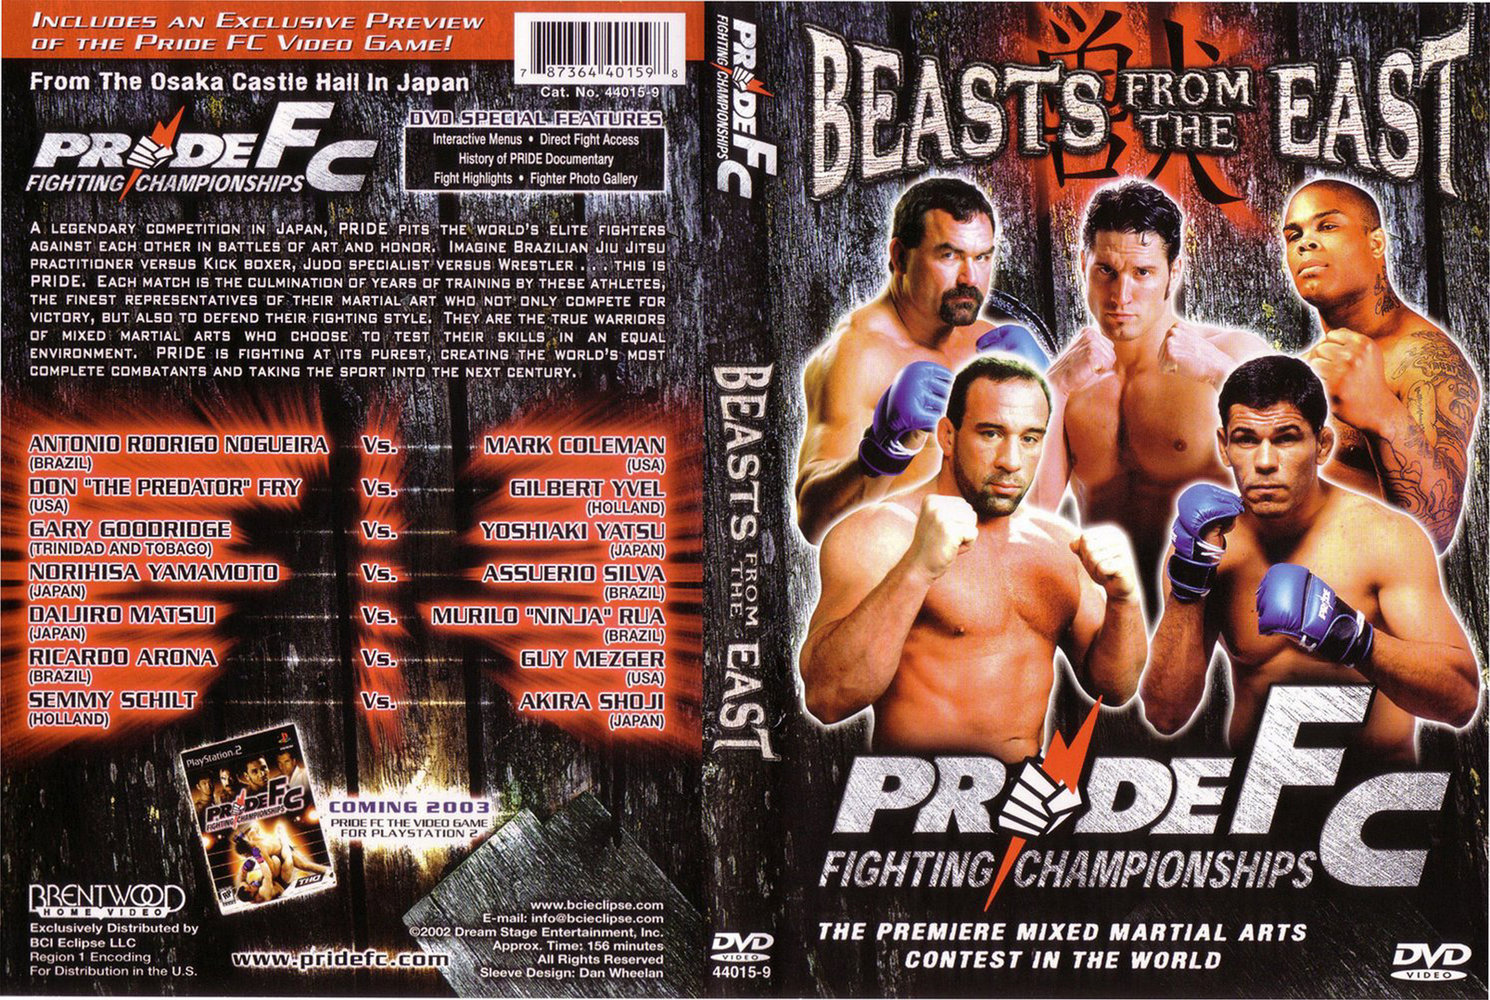 Jaquette DVD Pride Fc Beasts from the East